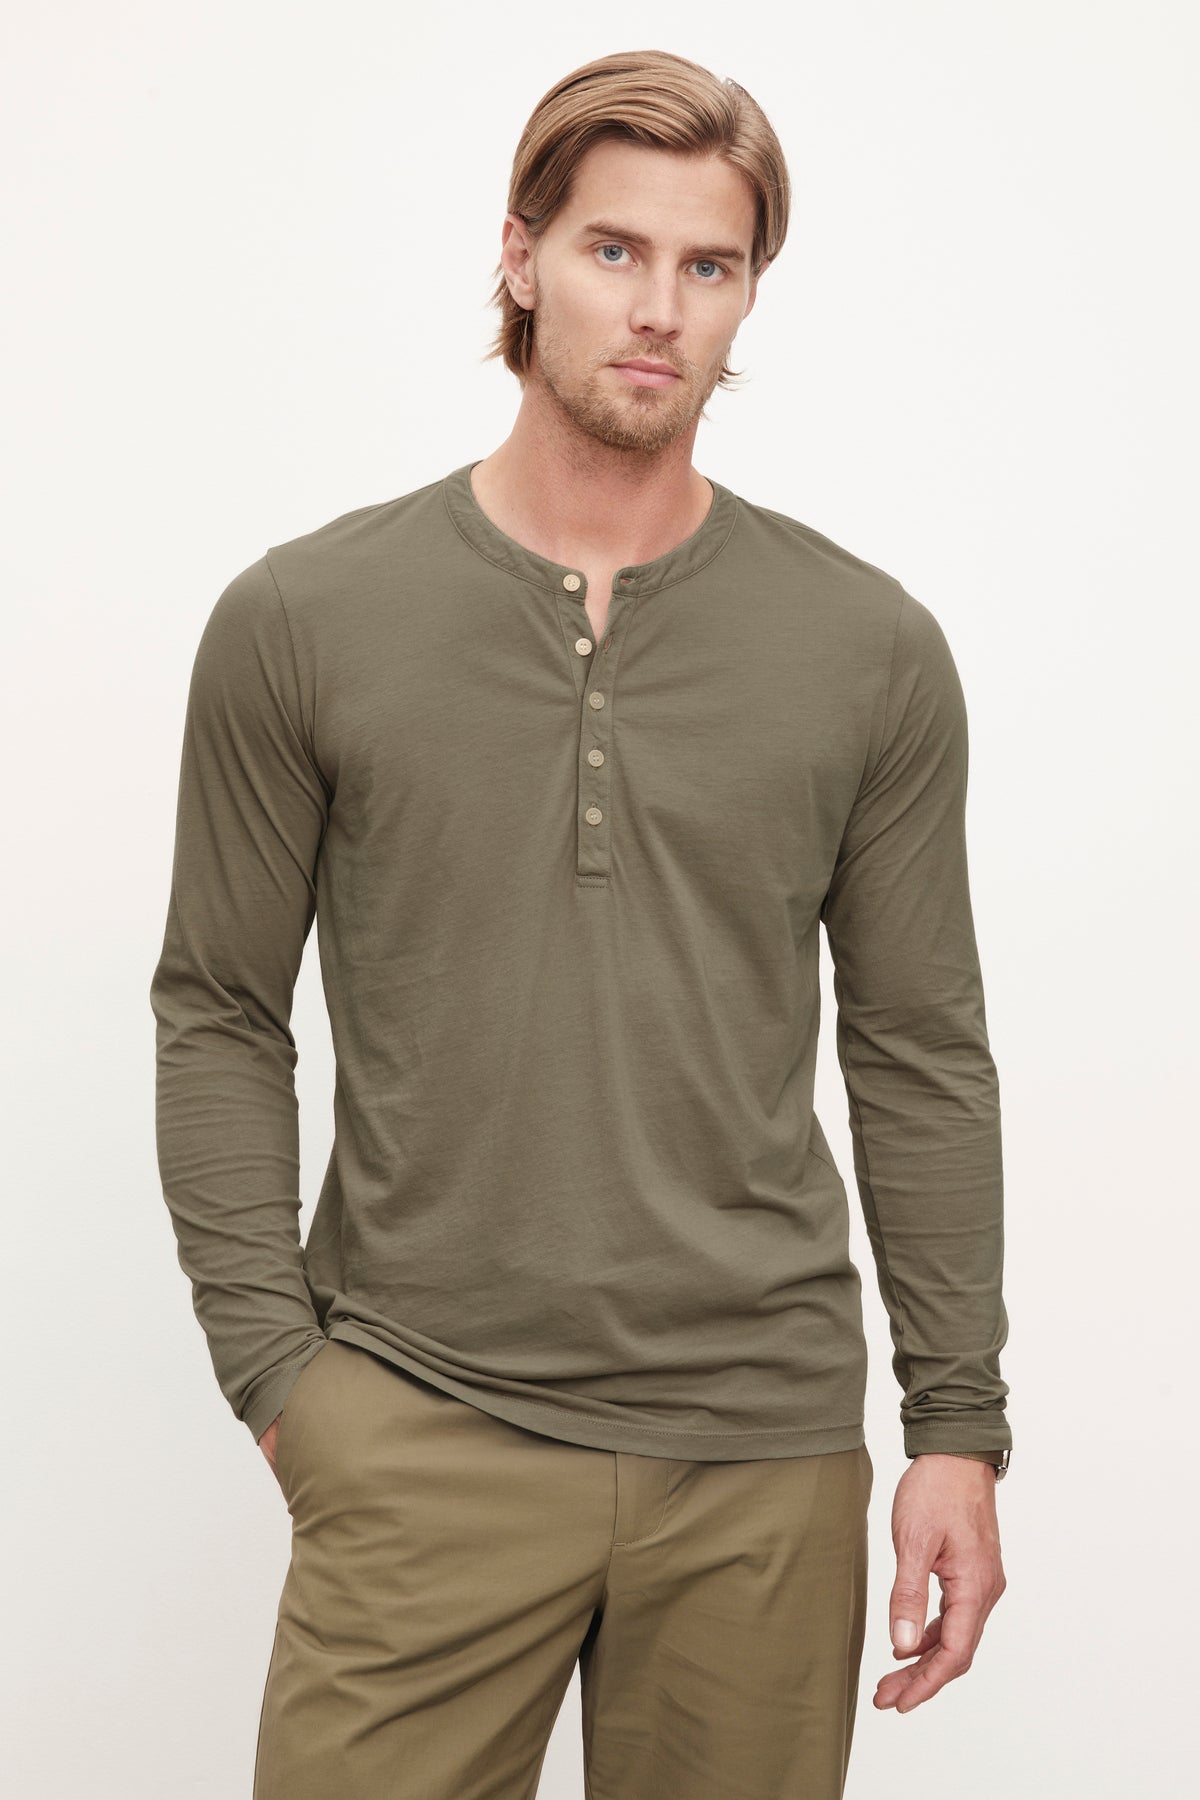   A man with blond hair and a beard, wearing a long-sleeve, olive green ALVARO HENLEY from Velvet by Graham & Spencer made from lightweight whisper knit fabric and khaki pants, stands with one hand in his pocket against a plain white background. 